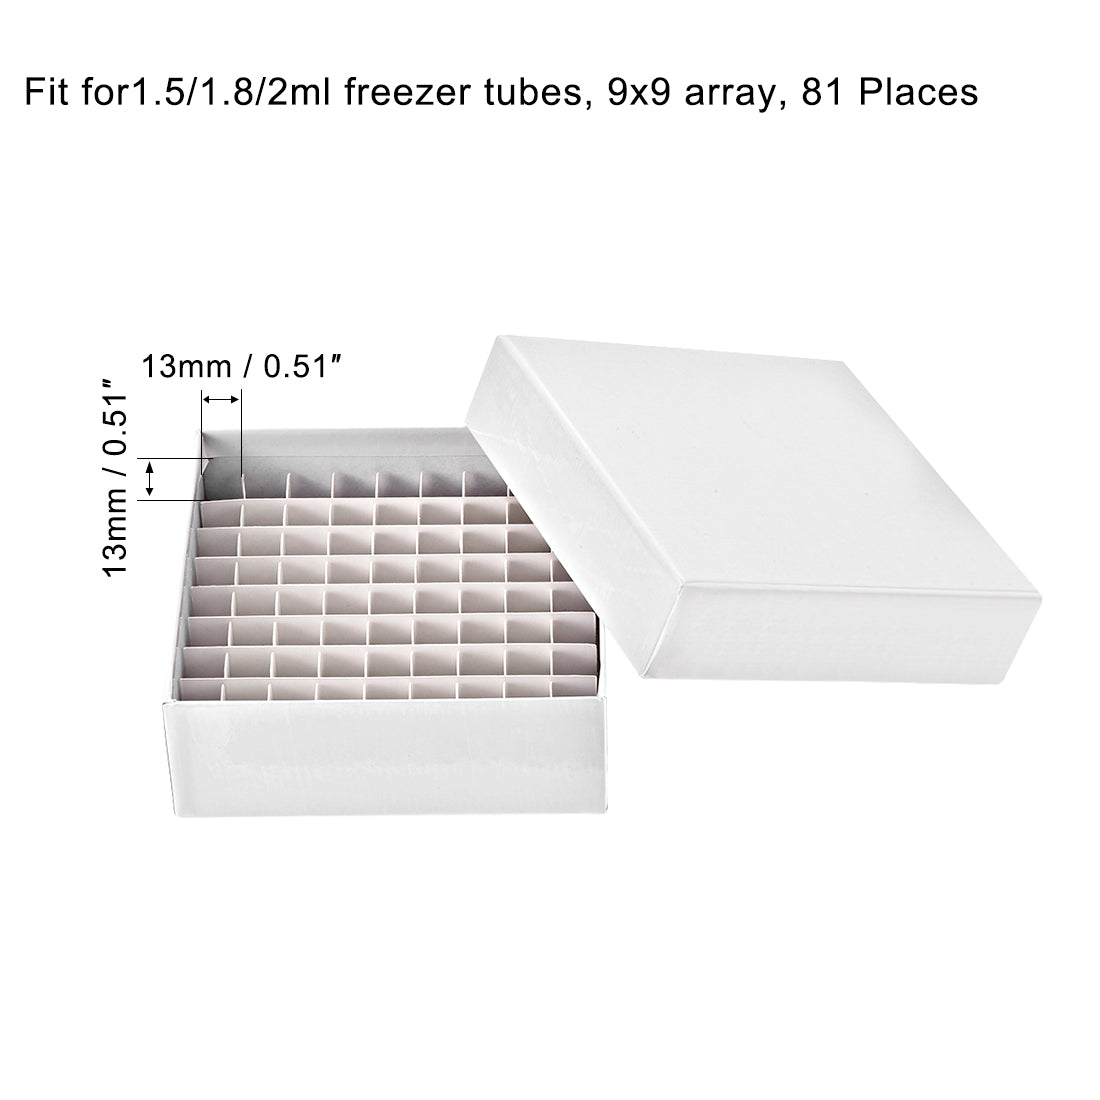 uxcell Uxcell Freezer Tube Box 81 Places Waterproof Cardboard Holder Rack for 1.5/1.8/2ml Microcentrifuge Tubes